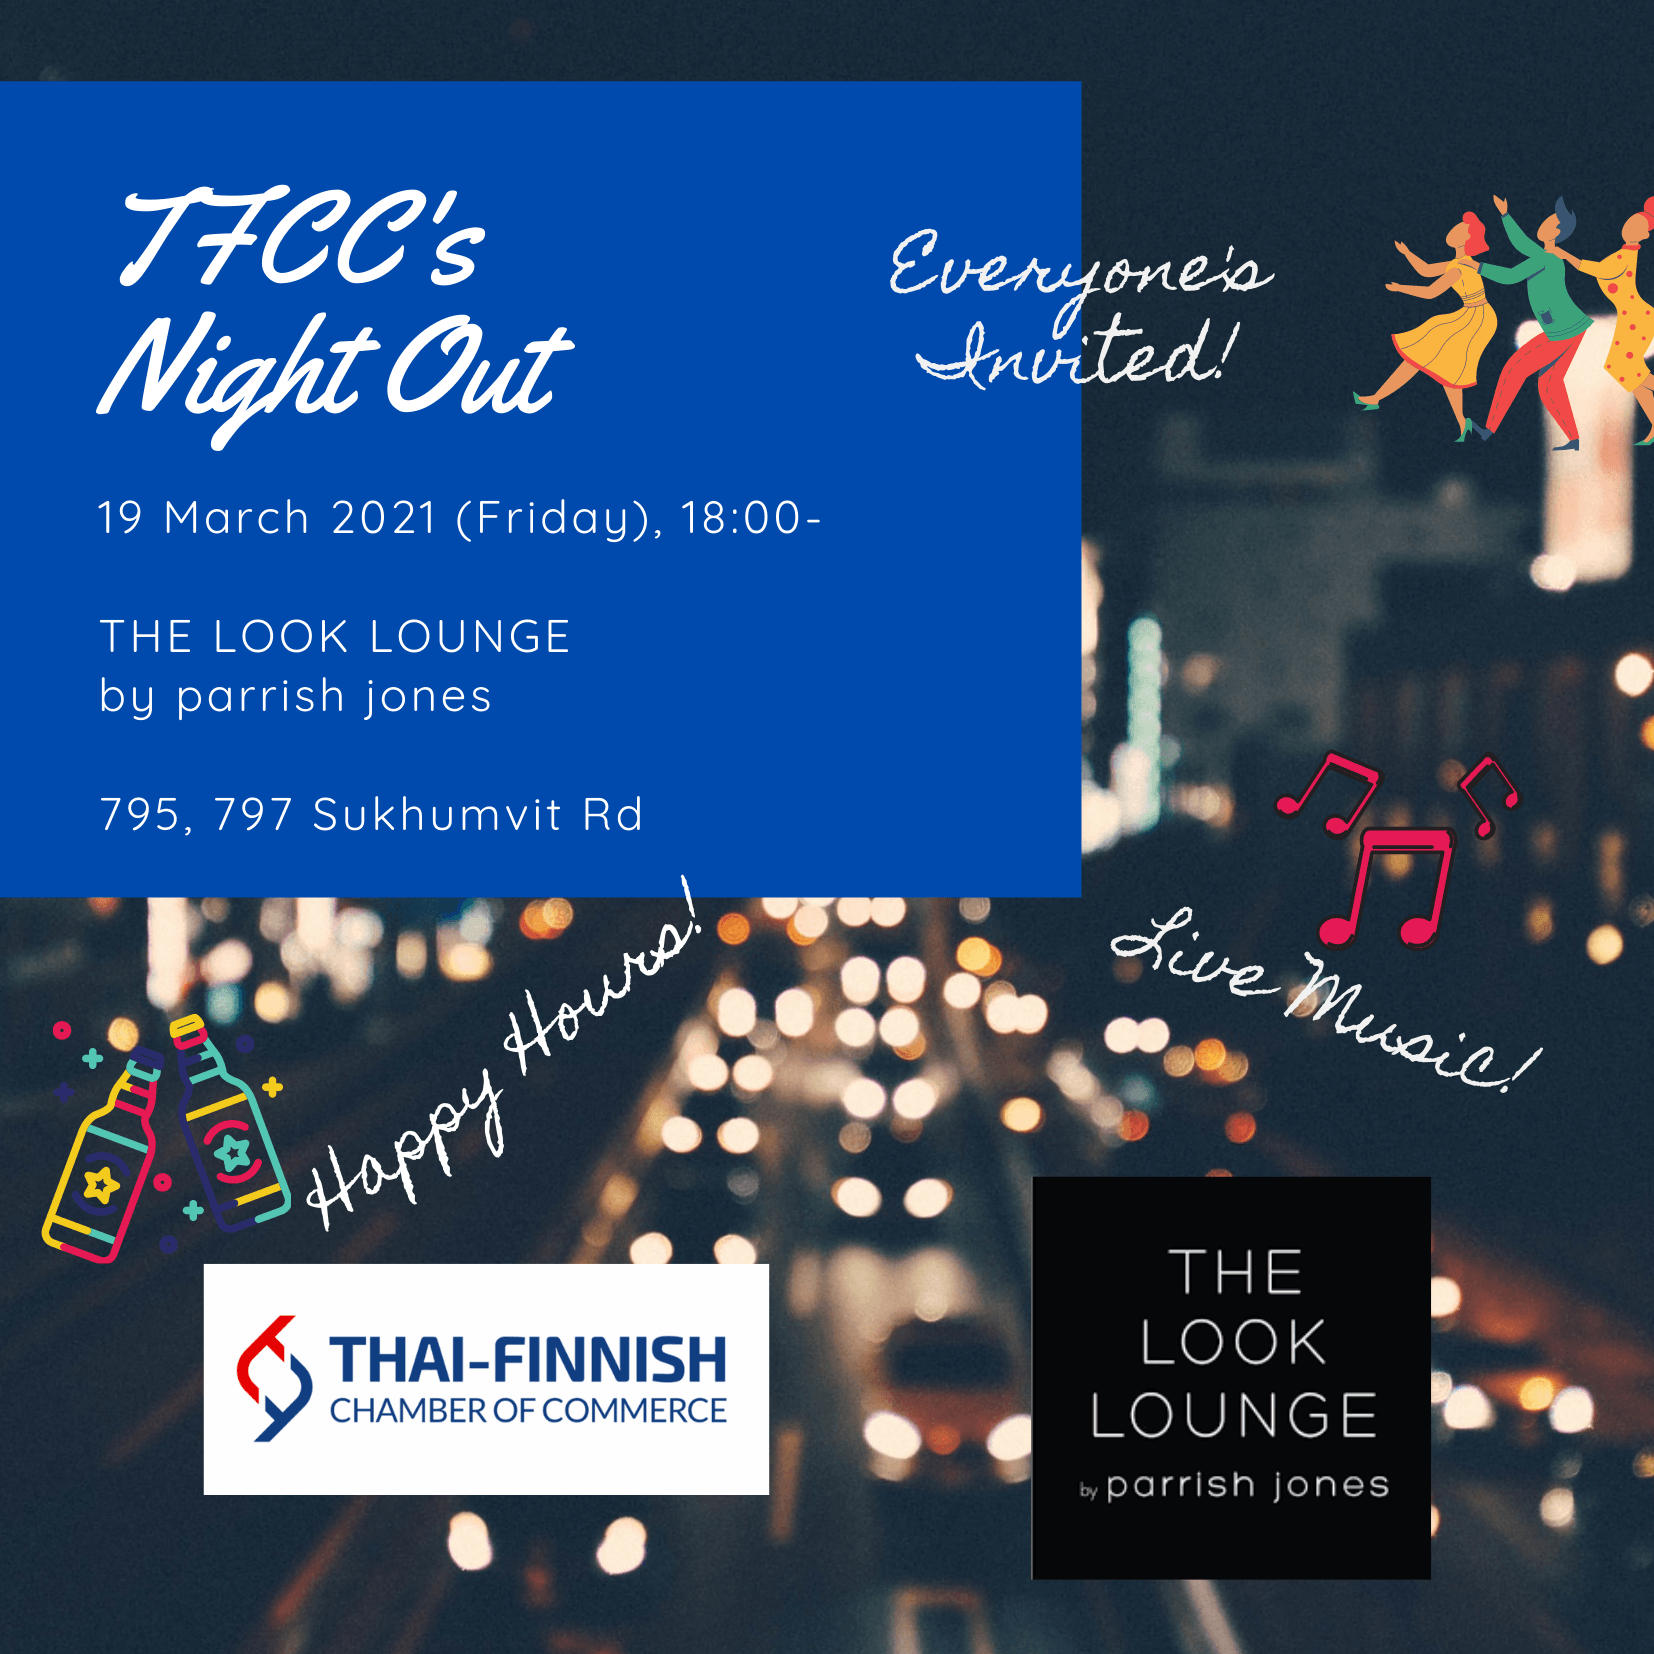 TFCC's Night Out